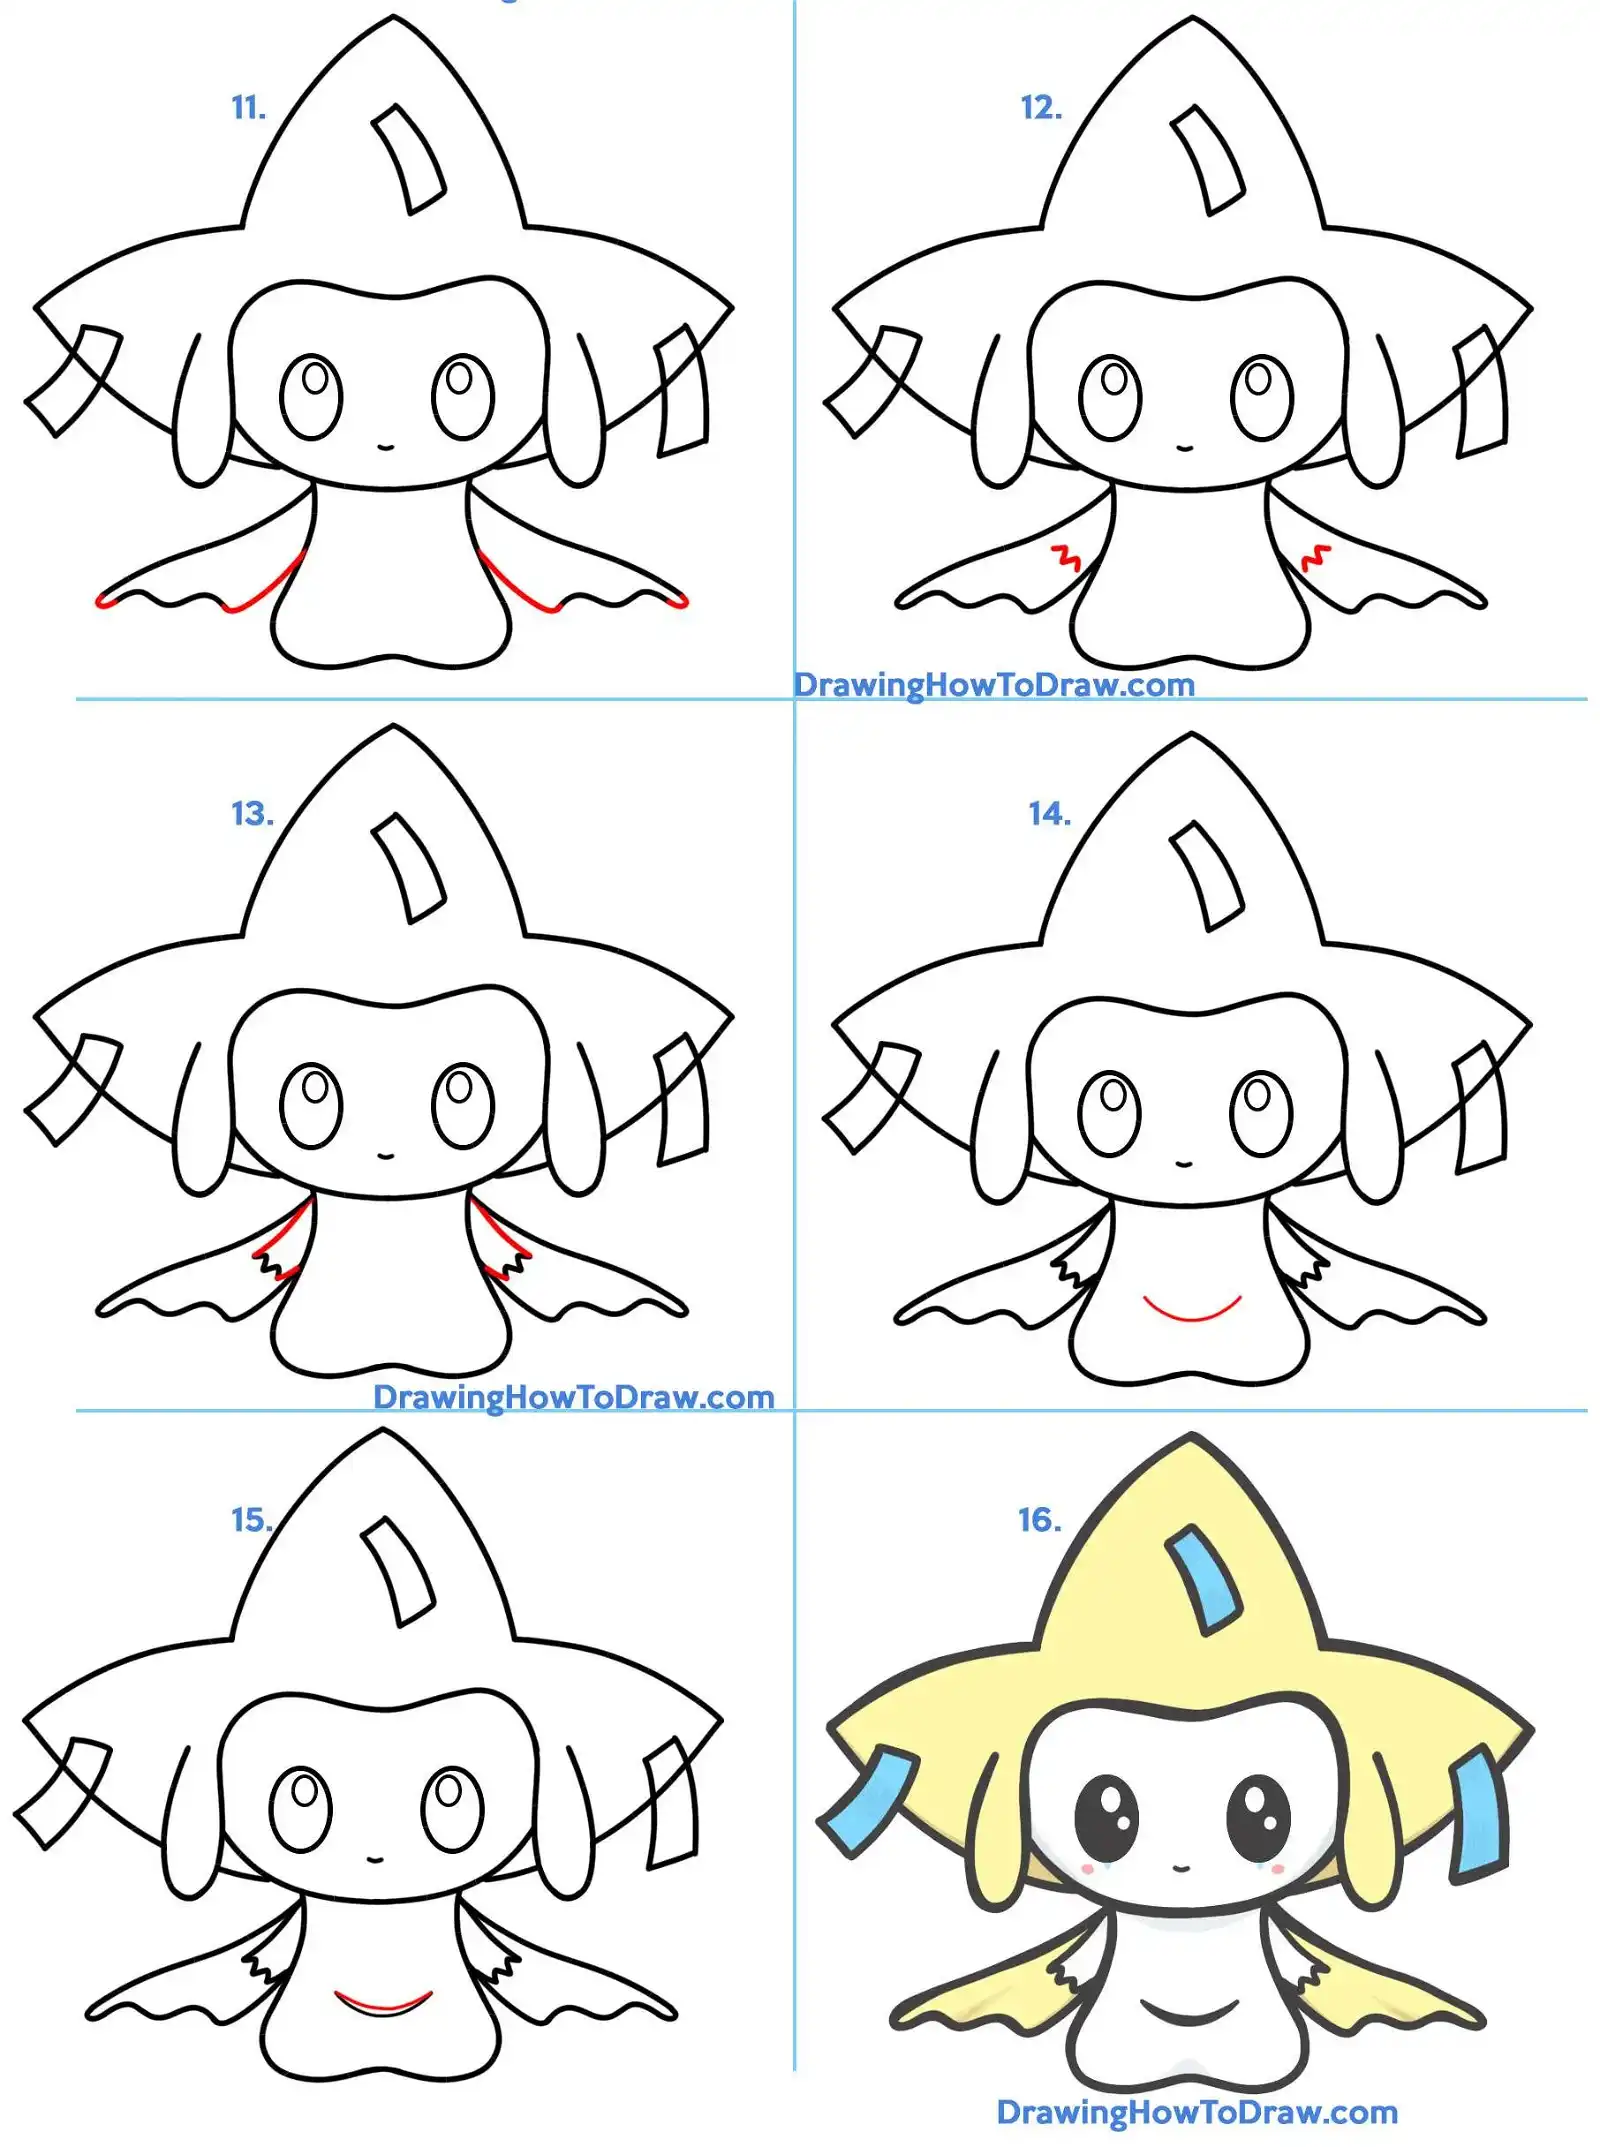 How to Draw a Cute / Kawaii / Chibi Jirachi from Pokemon Easy Step by ...